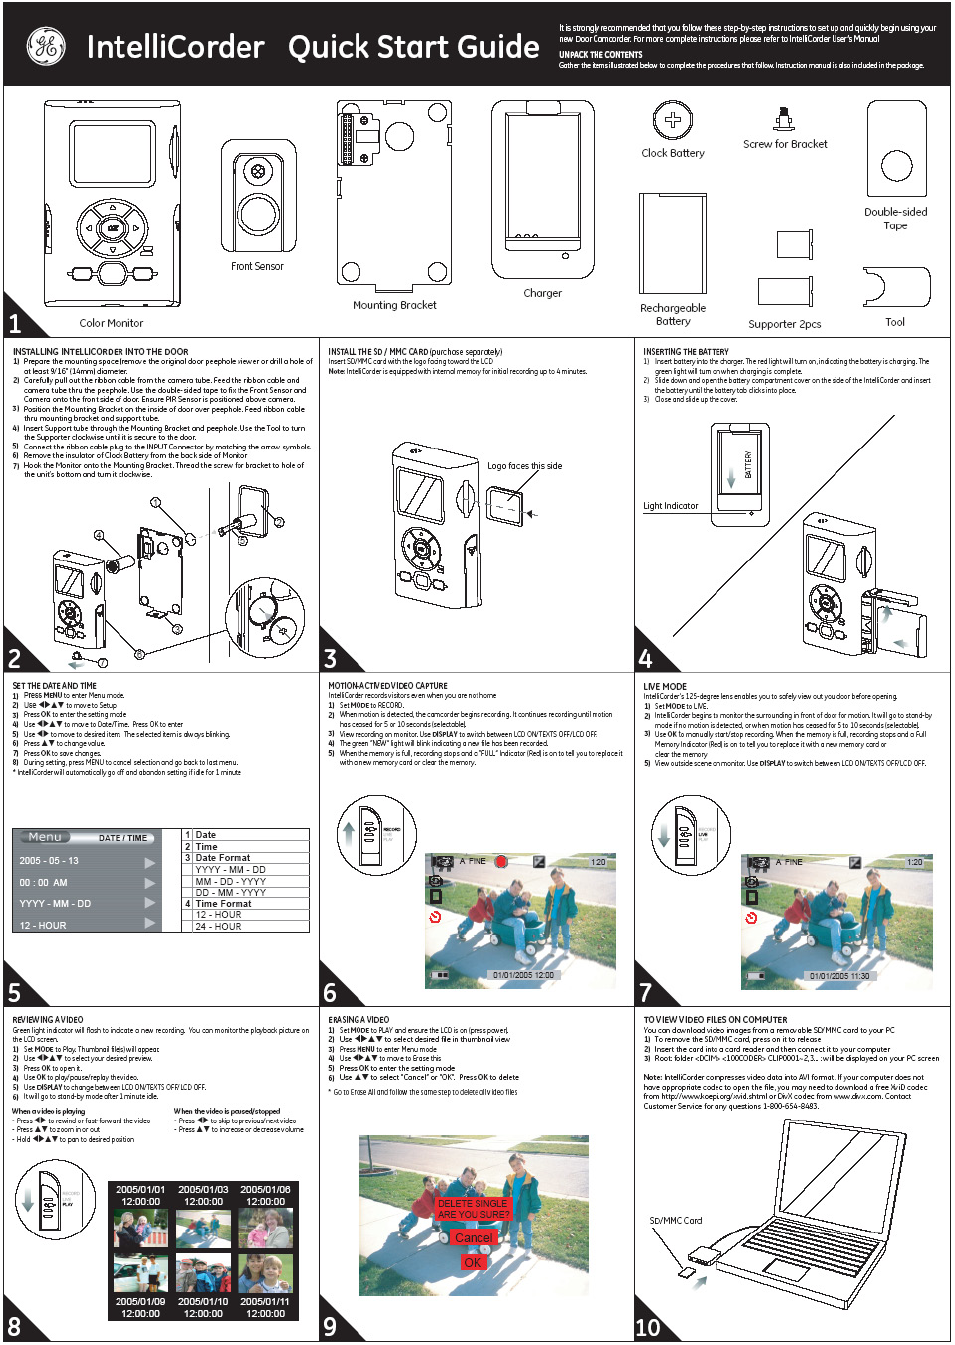 45227 GE IntelliCorder Camera System Quick Start Guide